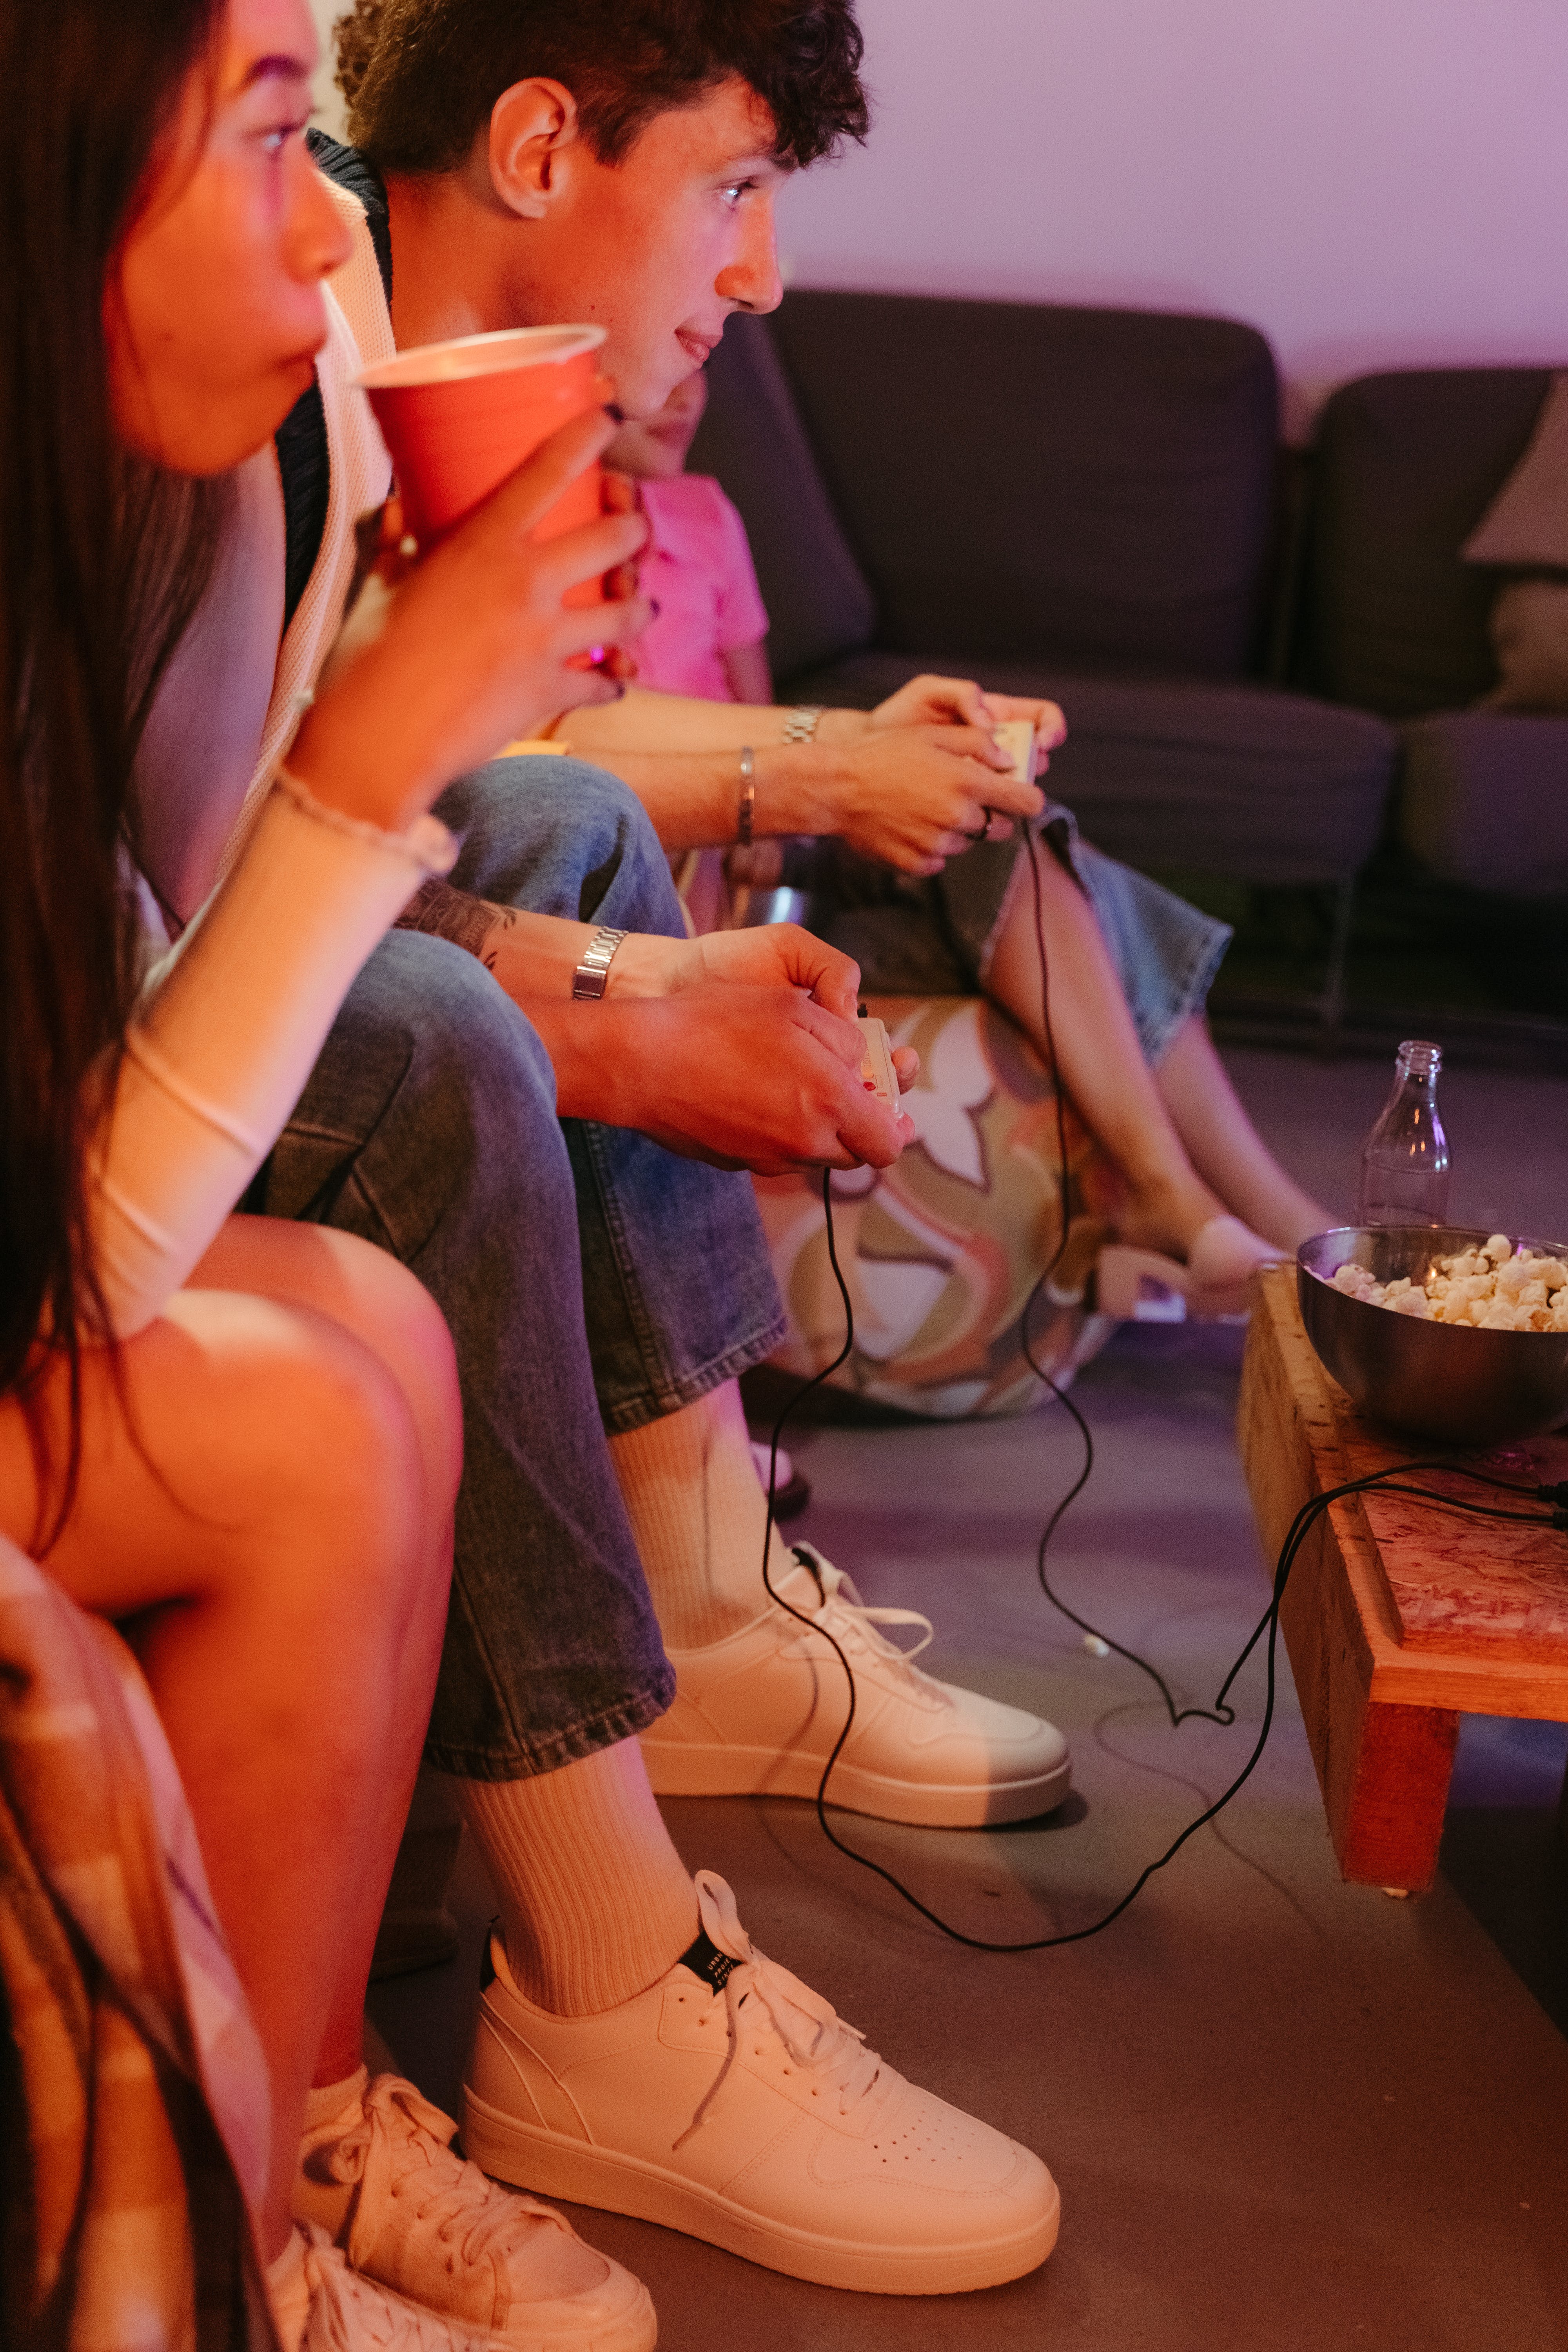 Friends drinking, eating, and playing games | Source: Pexels